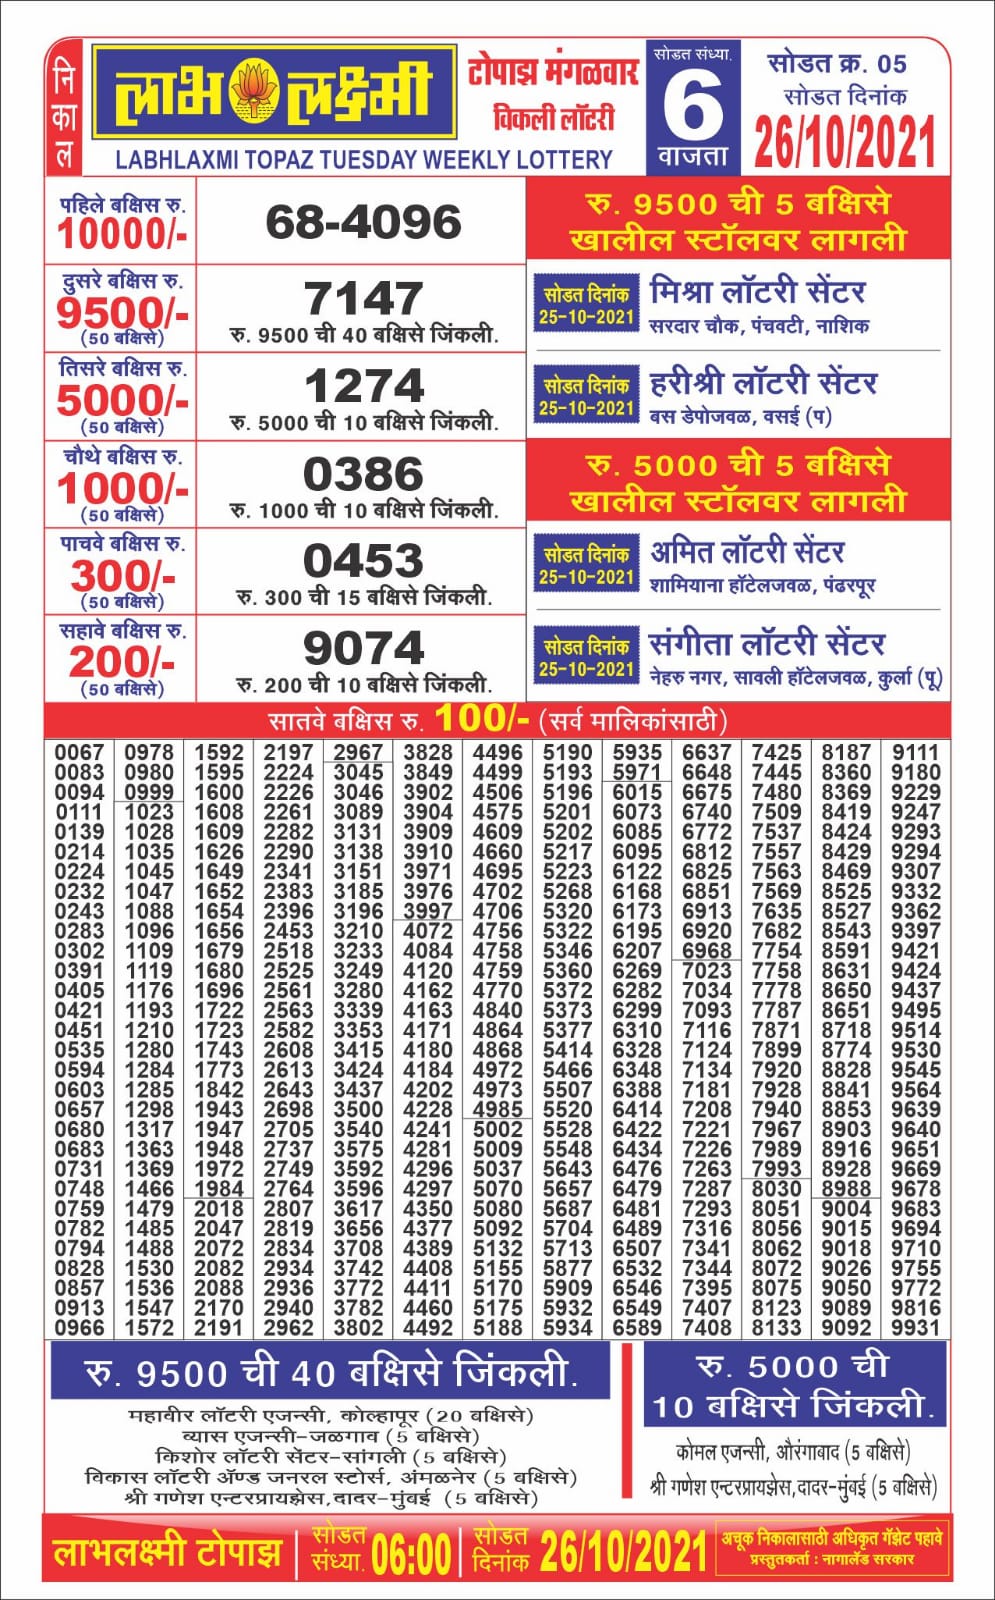 Labhlaxmi 6pm Lottery Result 26.10.2021